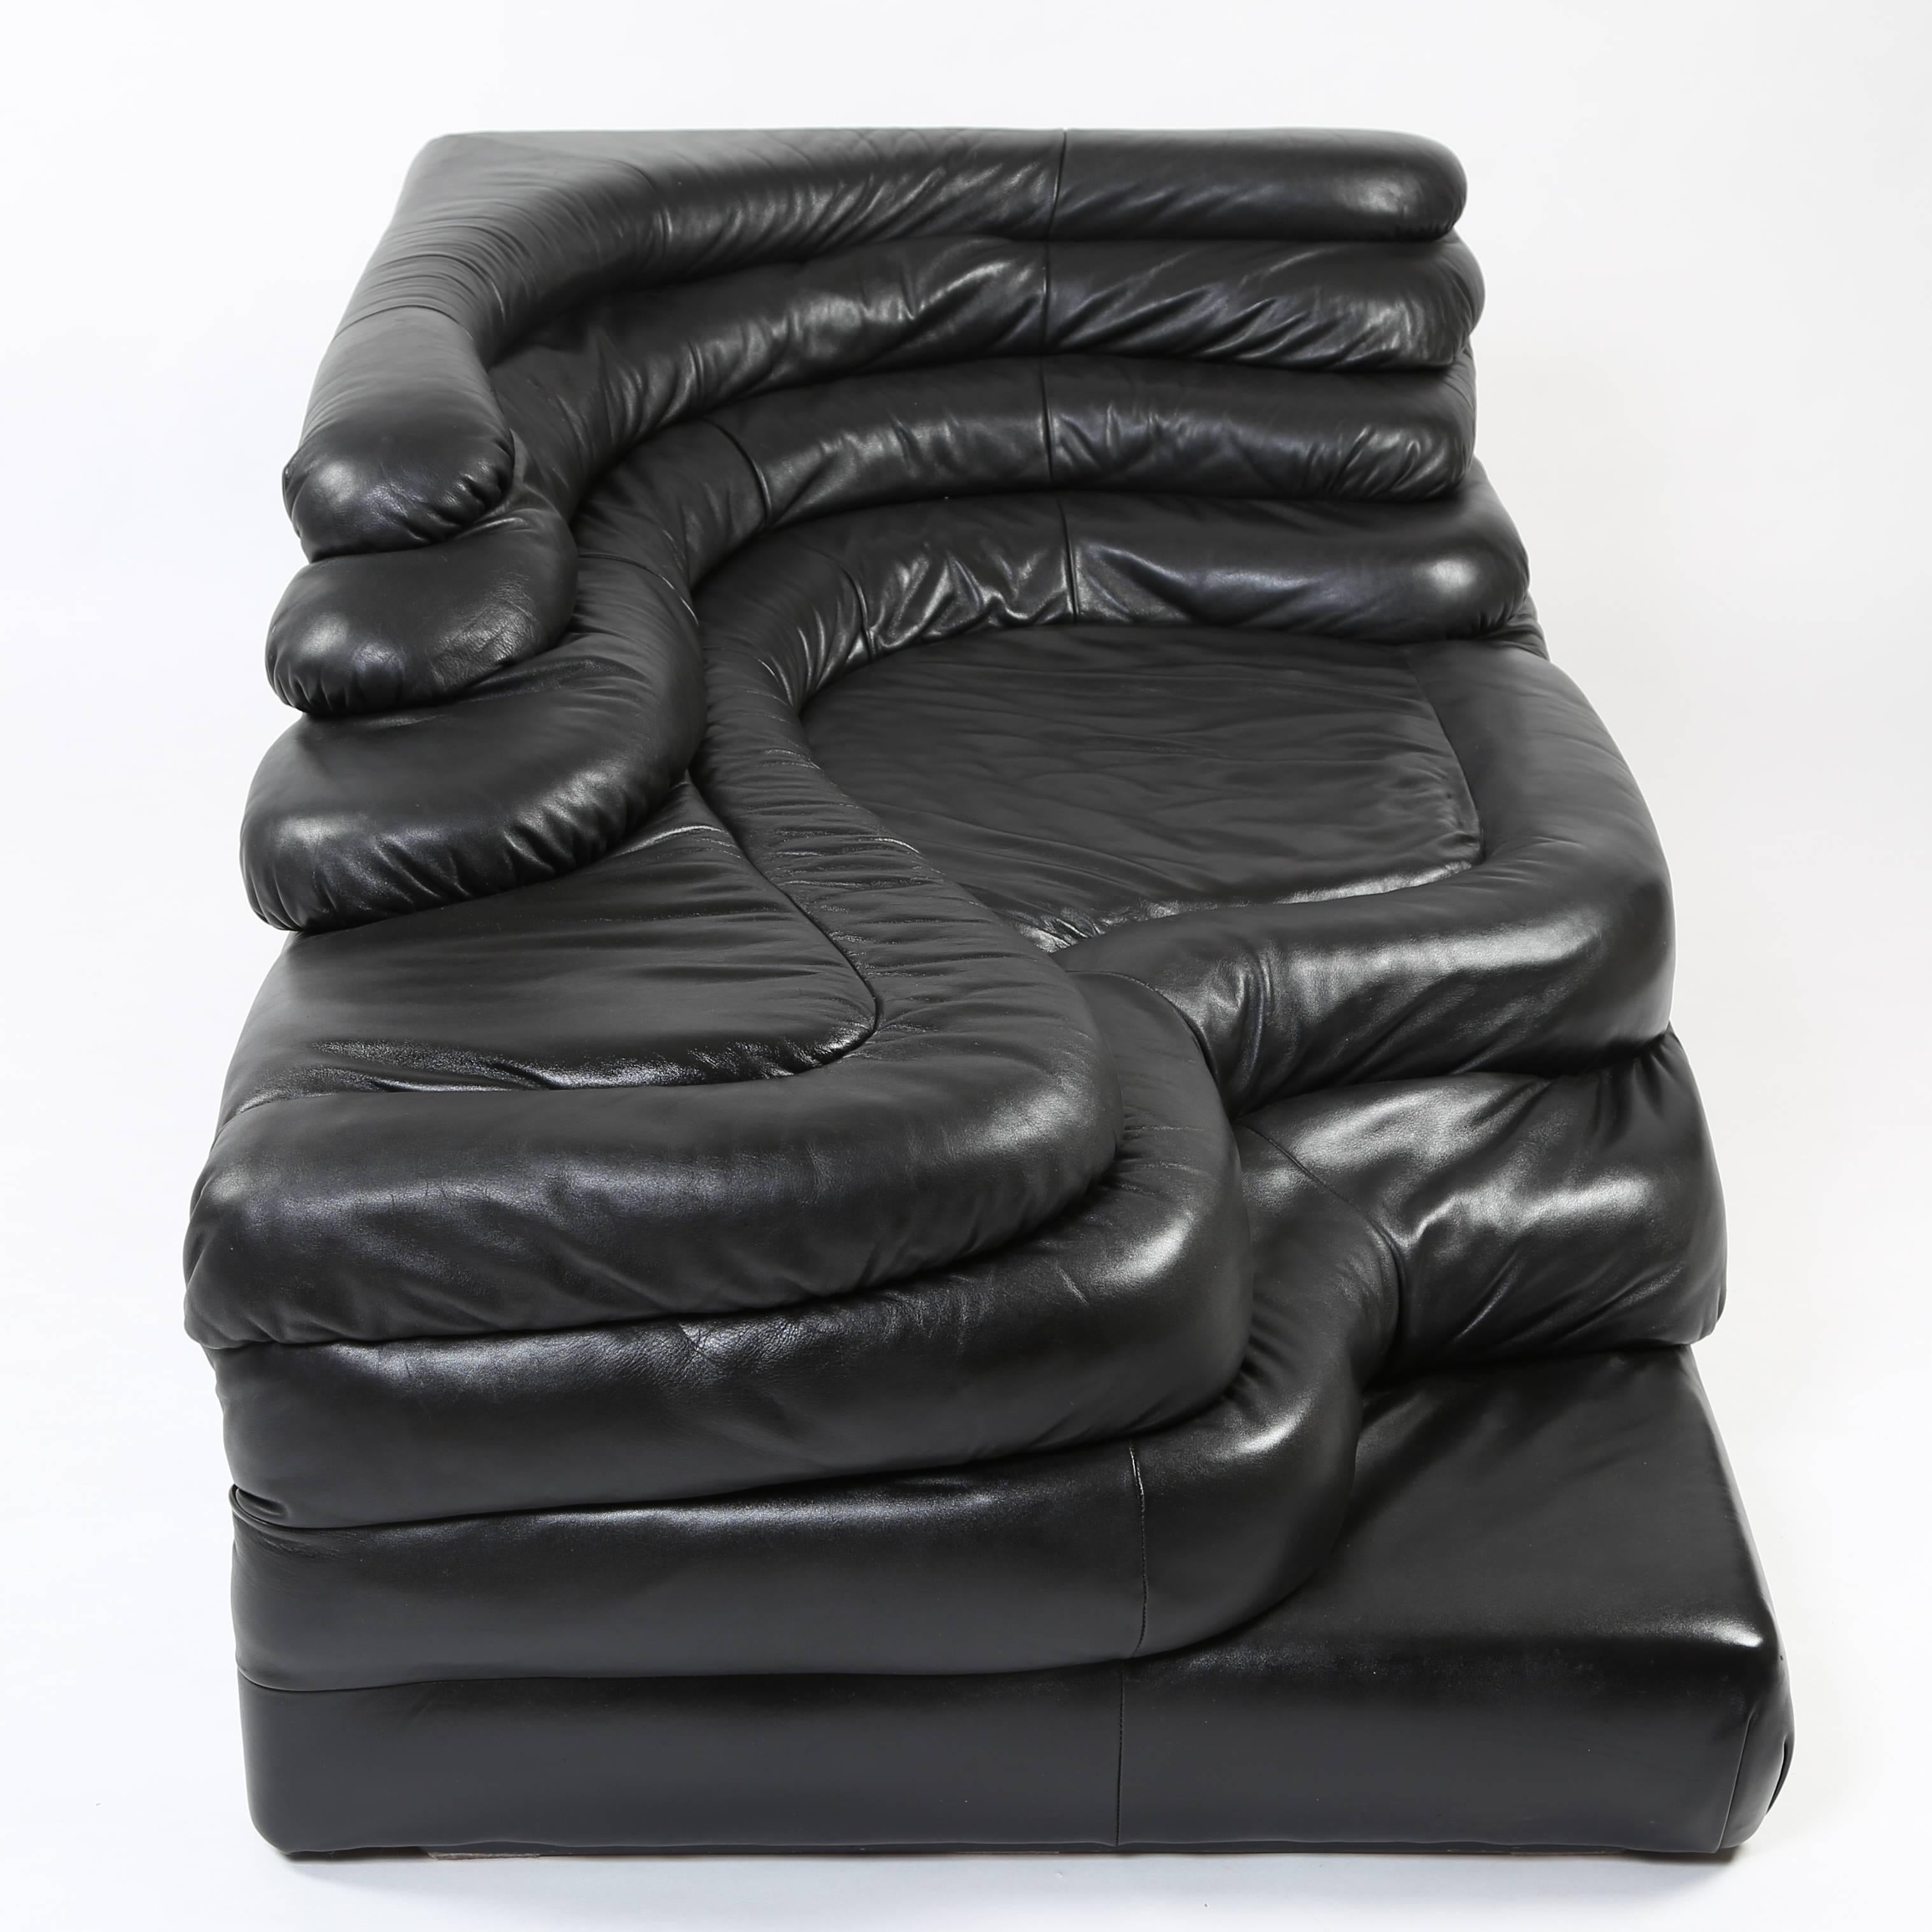 This unique piece of lounge seating in black leather from Ubald Klug's iconic Terrazza Furniture system will lend any room a dash of 1970s decadence. Leather newly restored. This item is in our Brooklyn showroom.